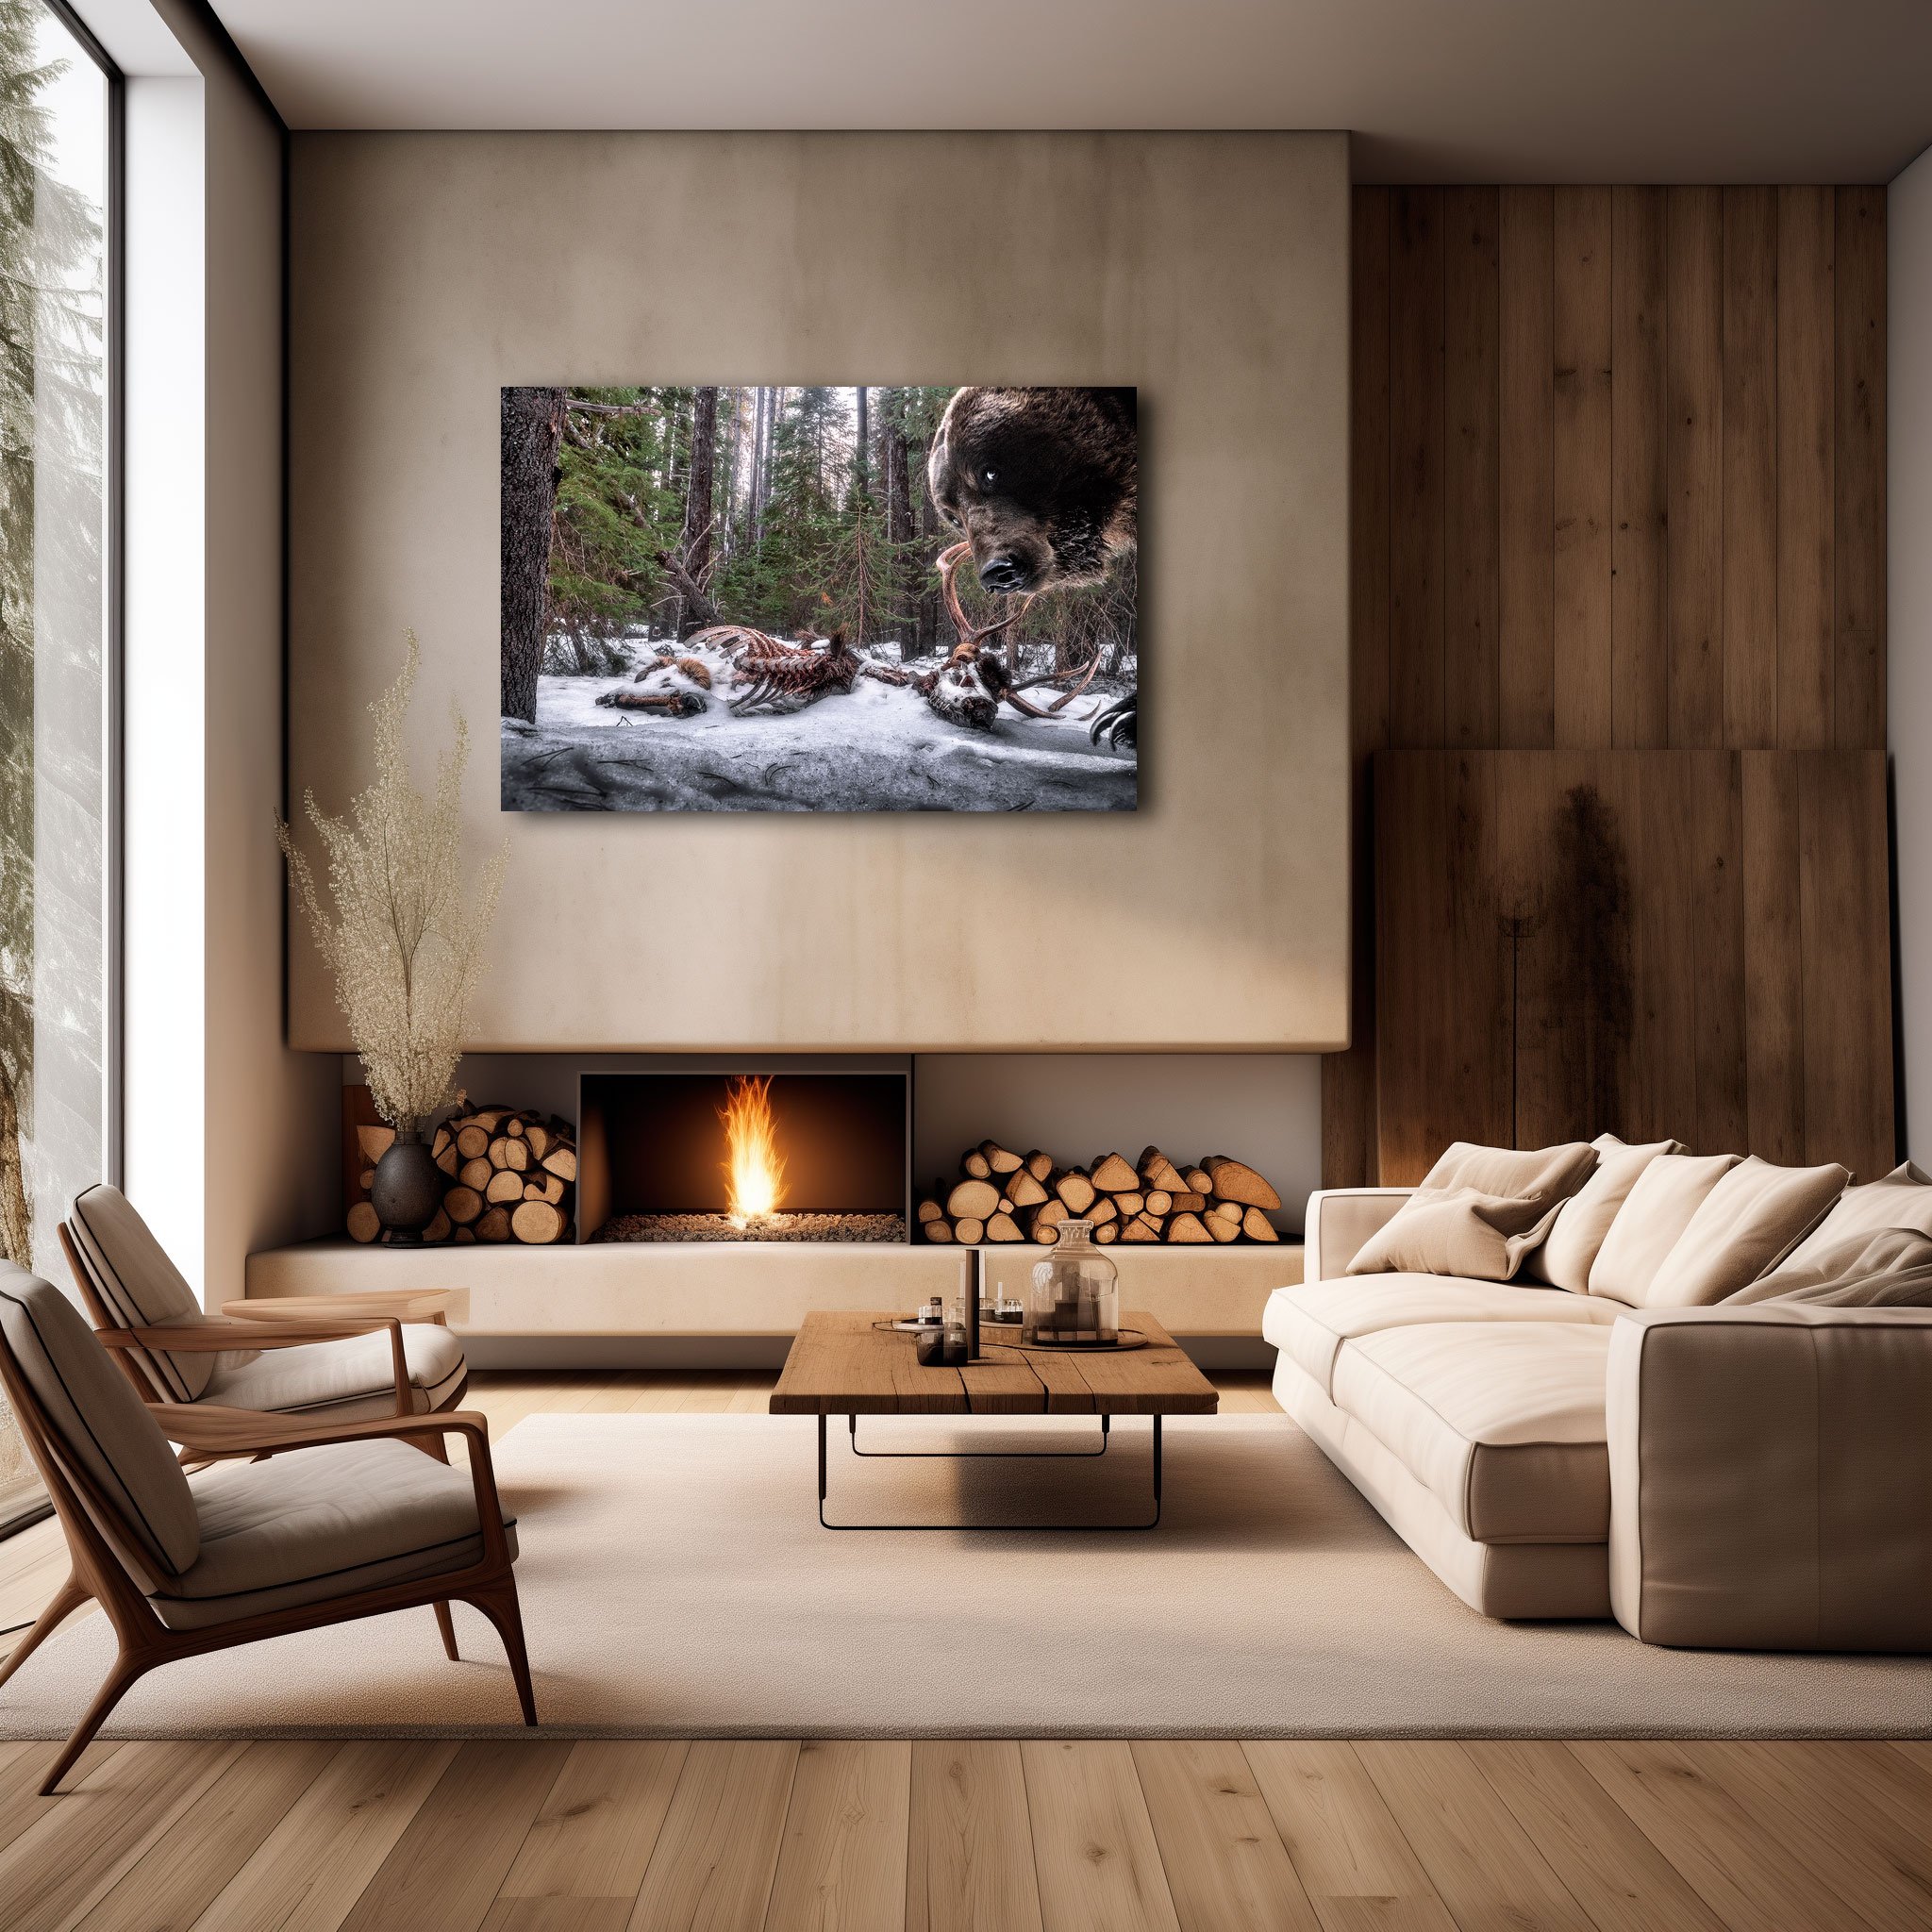 Grizzly-Remains-Fine-Art-Print-Home-Interior.jpg